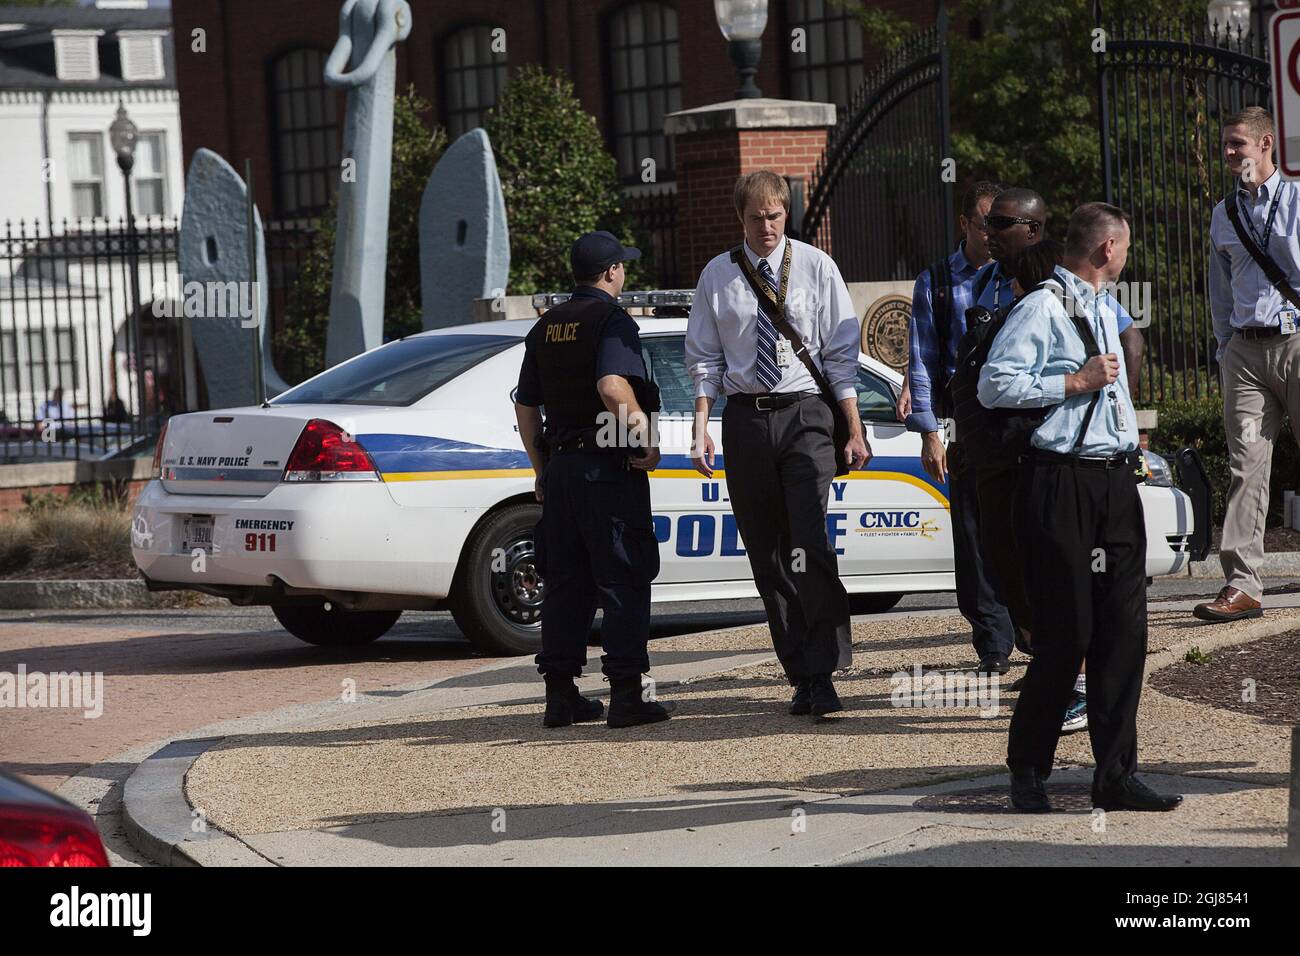 STOCKHOLM 2013-09-16 Police officeras outside the Navy Yard in Washington, DC, September 16, 2013. A shooting rampage Monday at a US naval base in the heart of Washington claimed at least 13 lives, including the gunman. Foto: Axel Oberg / XP / SCANPIX / kod 7139 ** OUT SWEDEN OUT **  Stock Photo